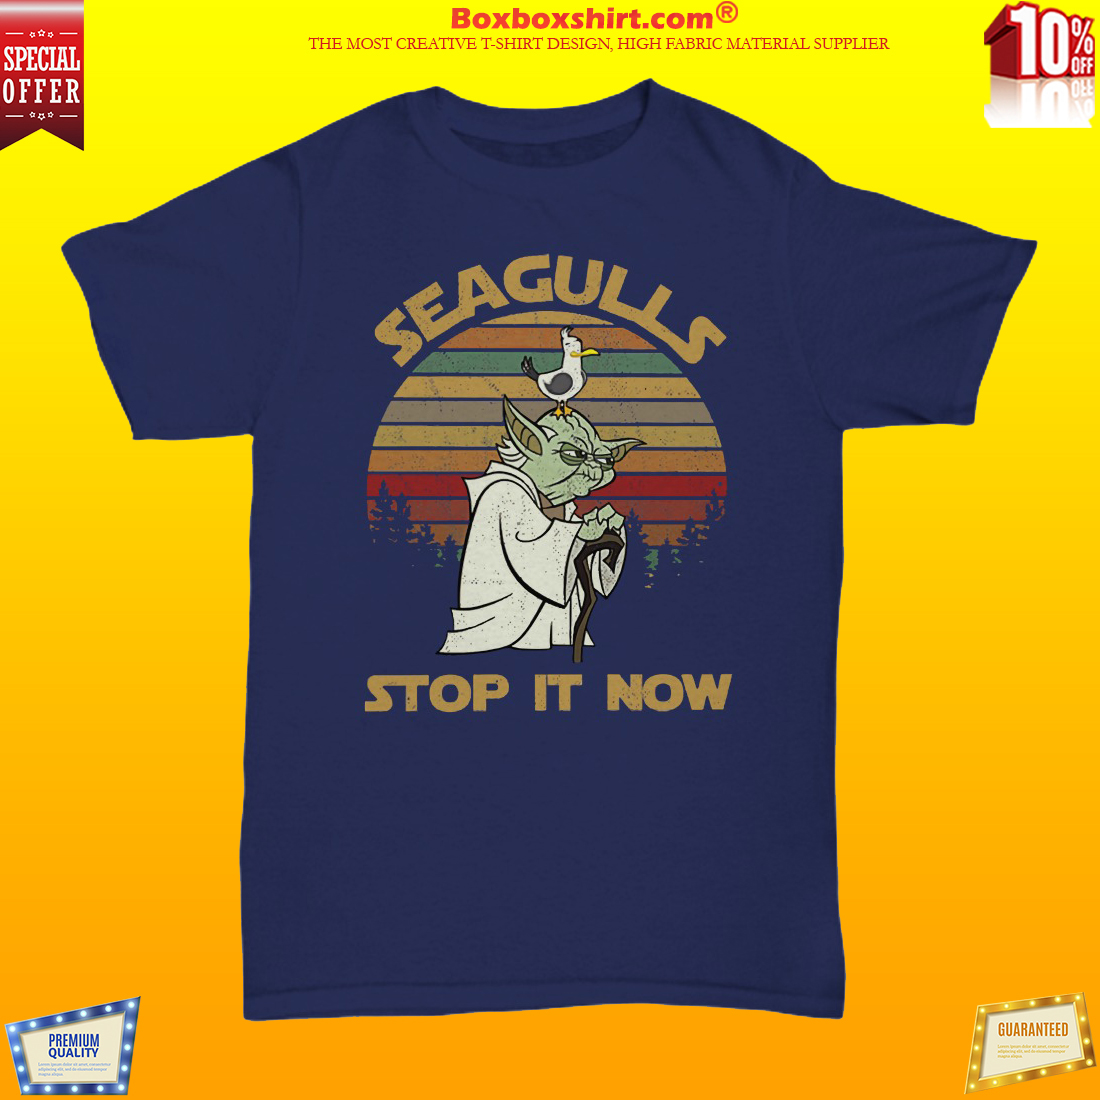 Seagulls stop it now shirt and hoodies